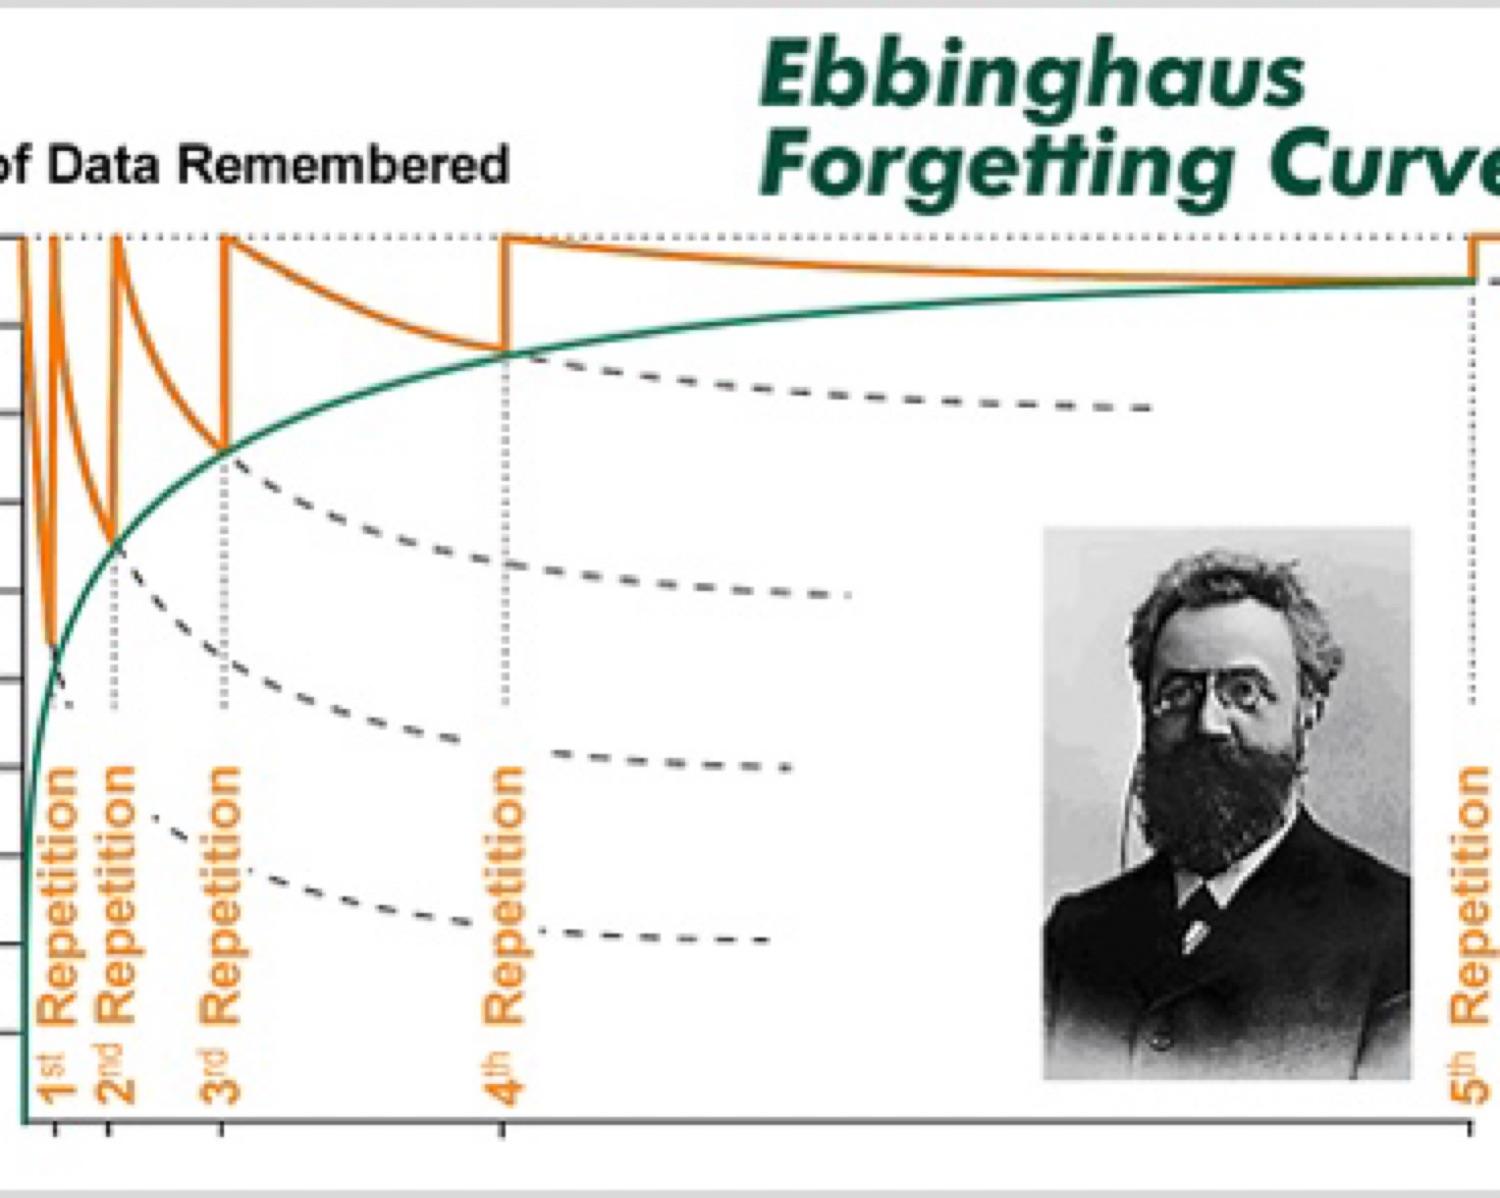 Principle: The Forgetting Curve